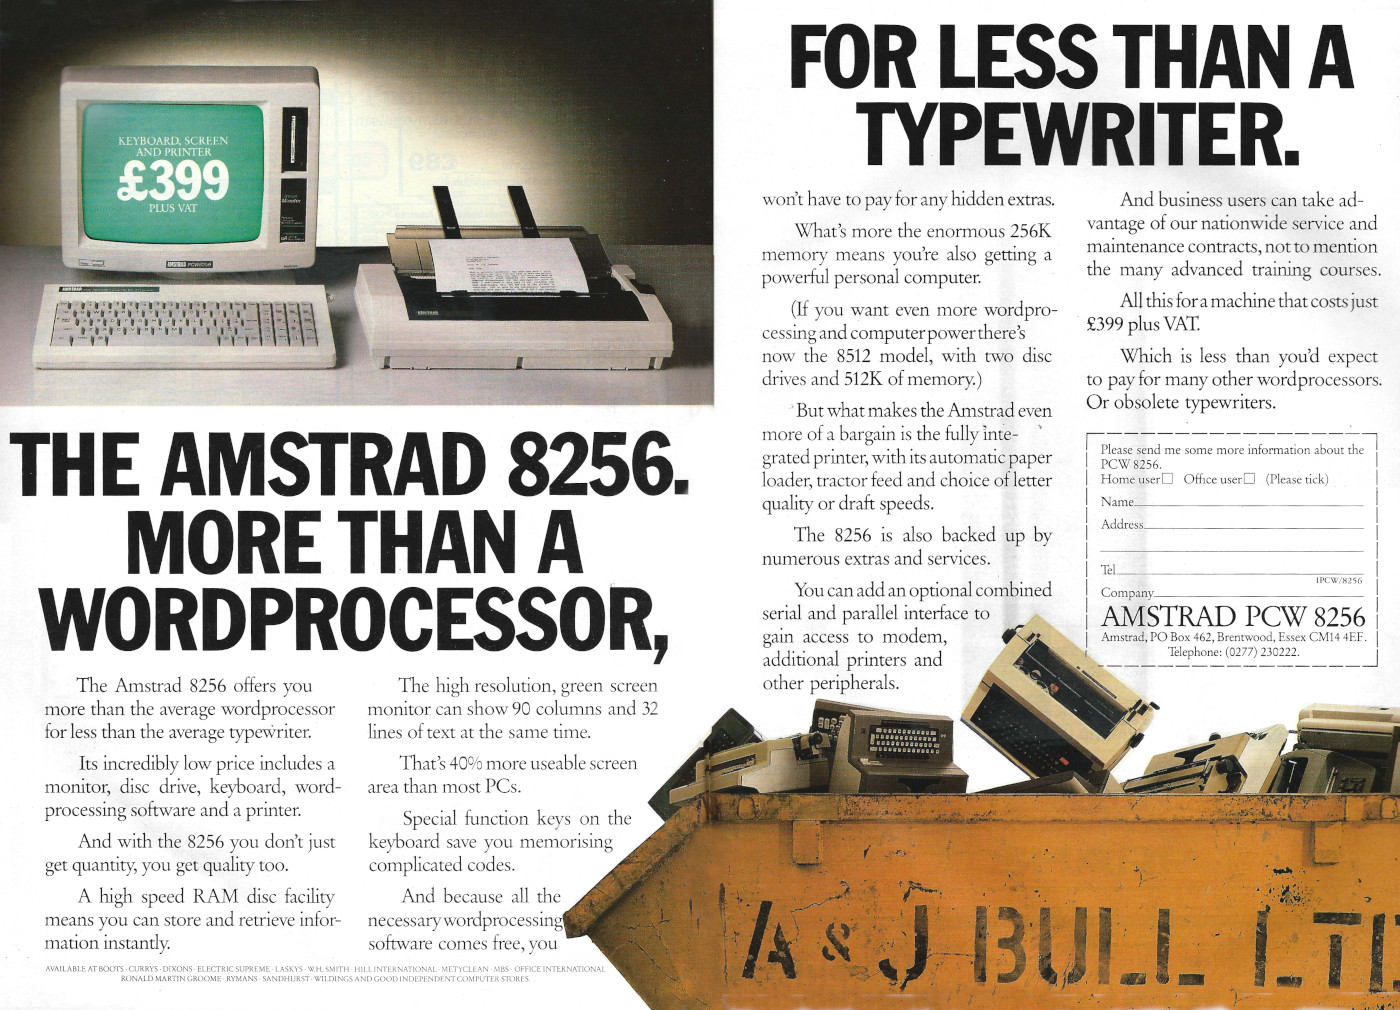 An advert for the PC‍W 8256 on a similar theme, with a skip full of junked computer equipment. From Personal Computer World, October 1986